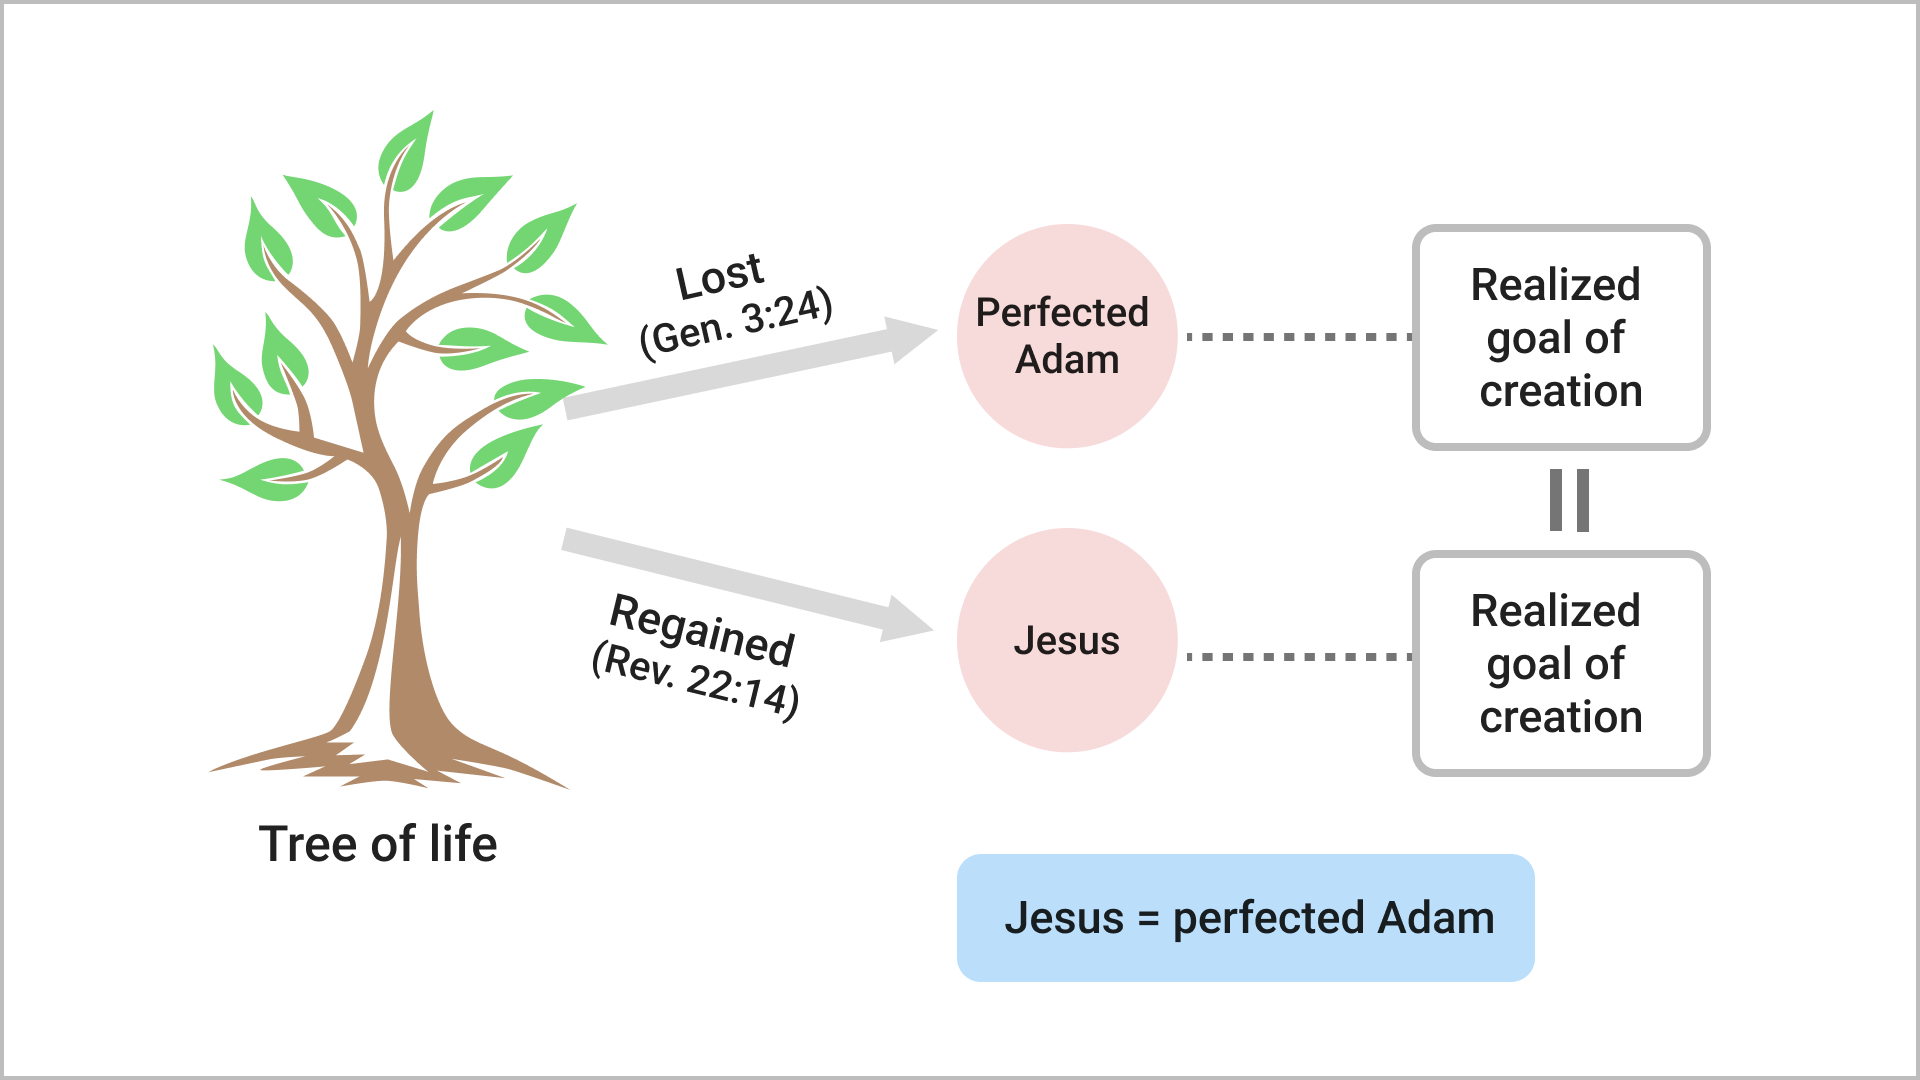 Perfected Adam, Jesus and the Restoration of the Tree of Life